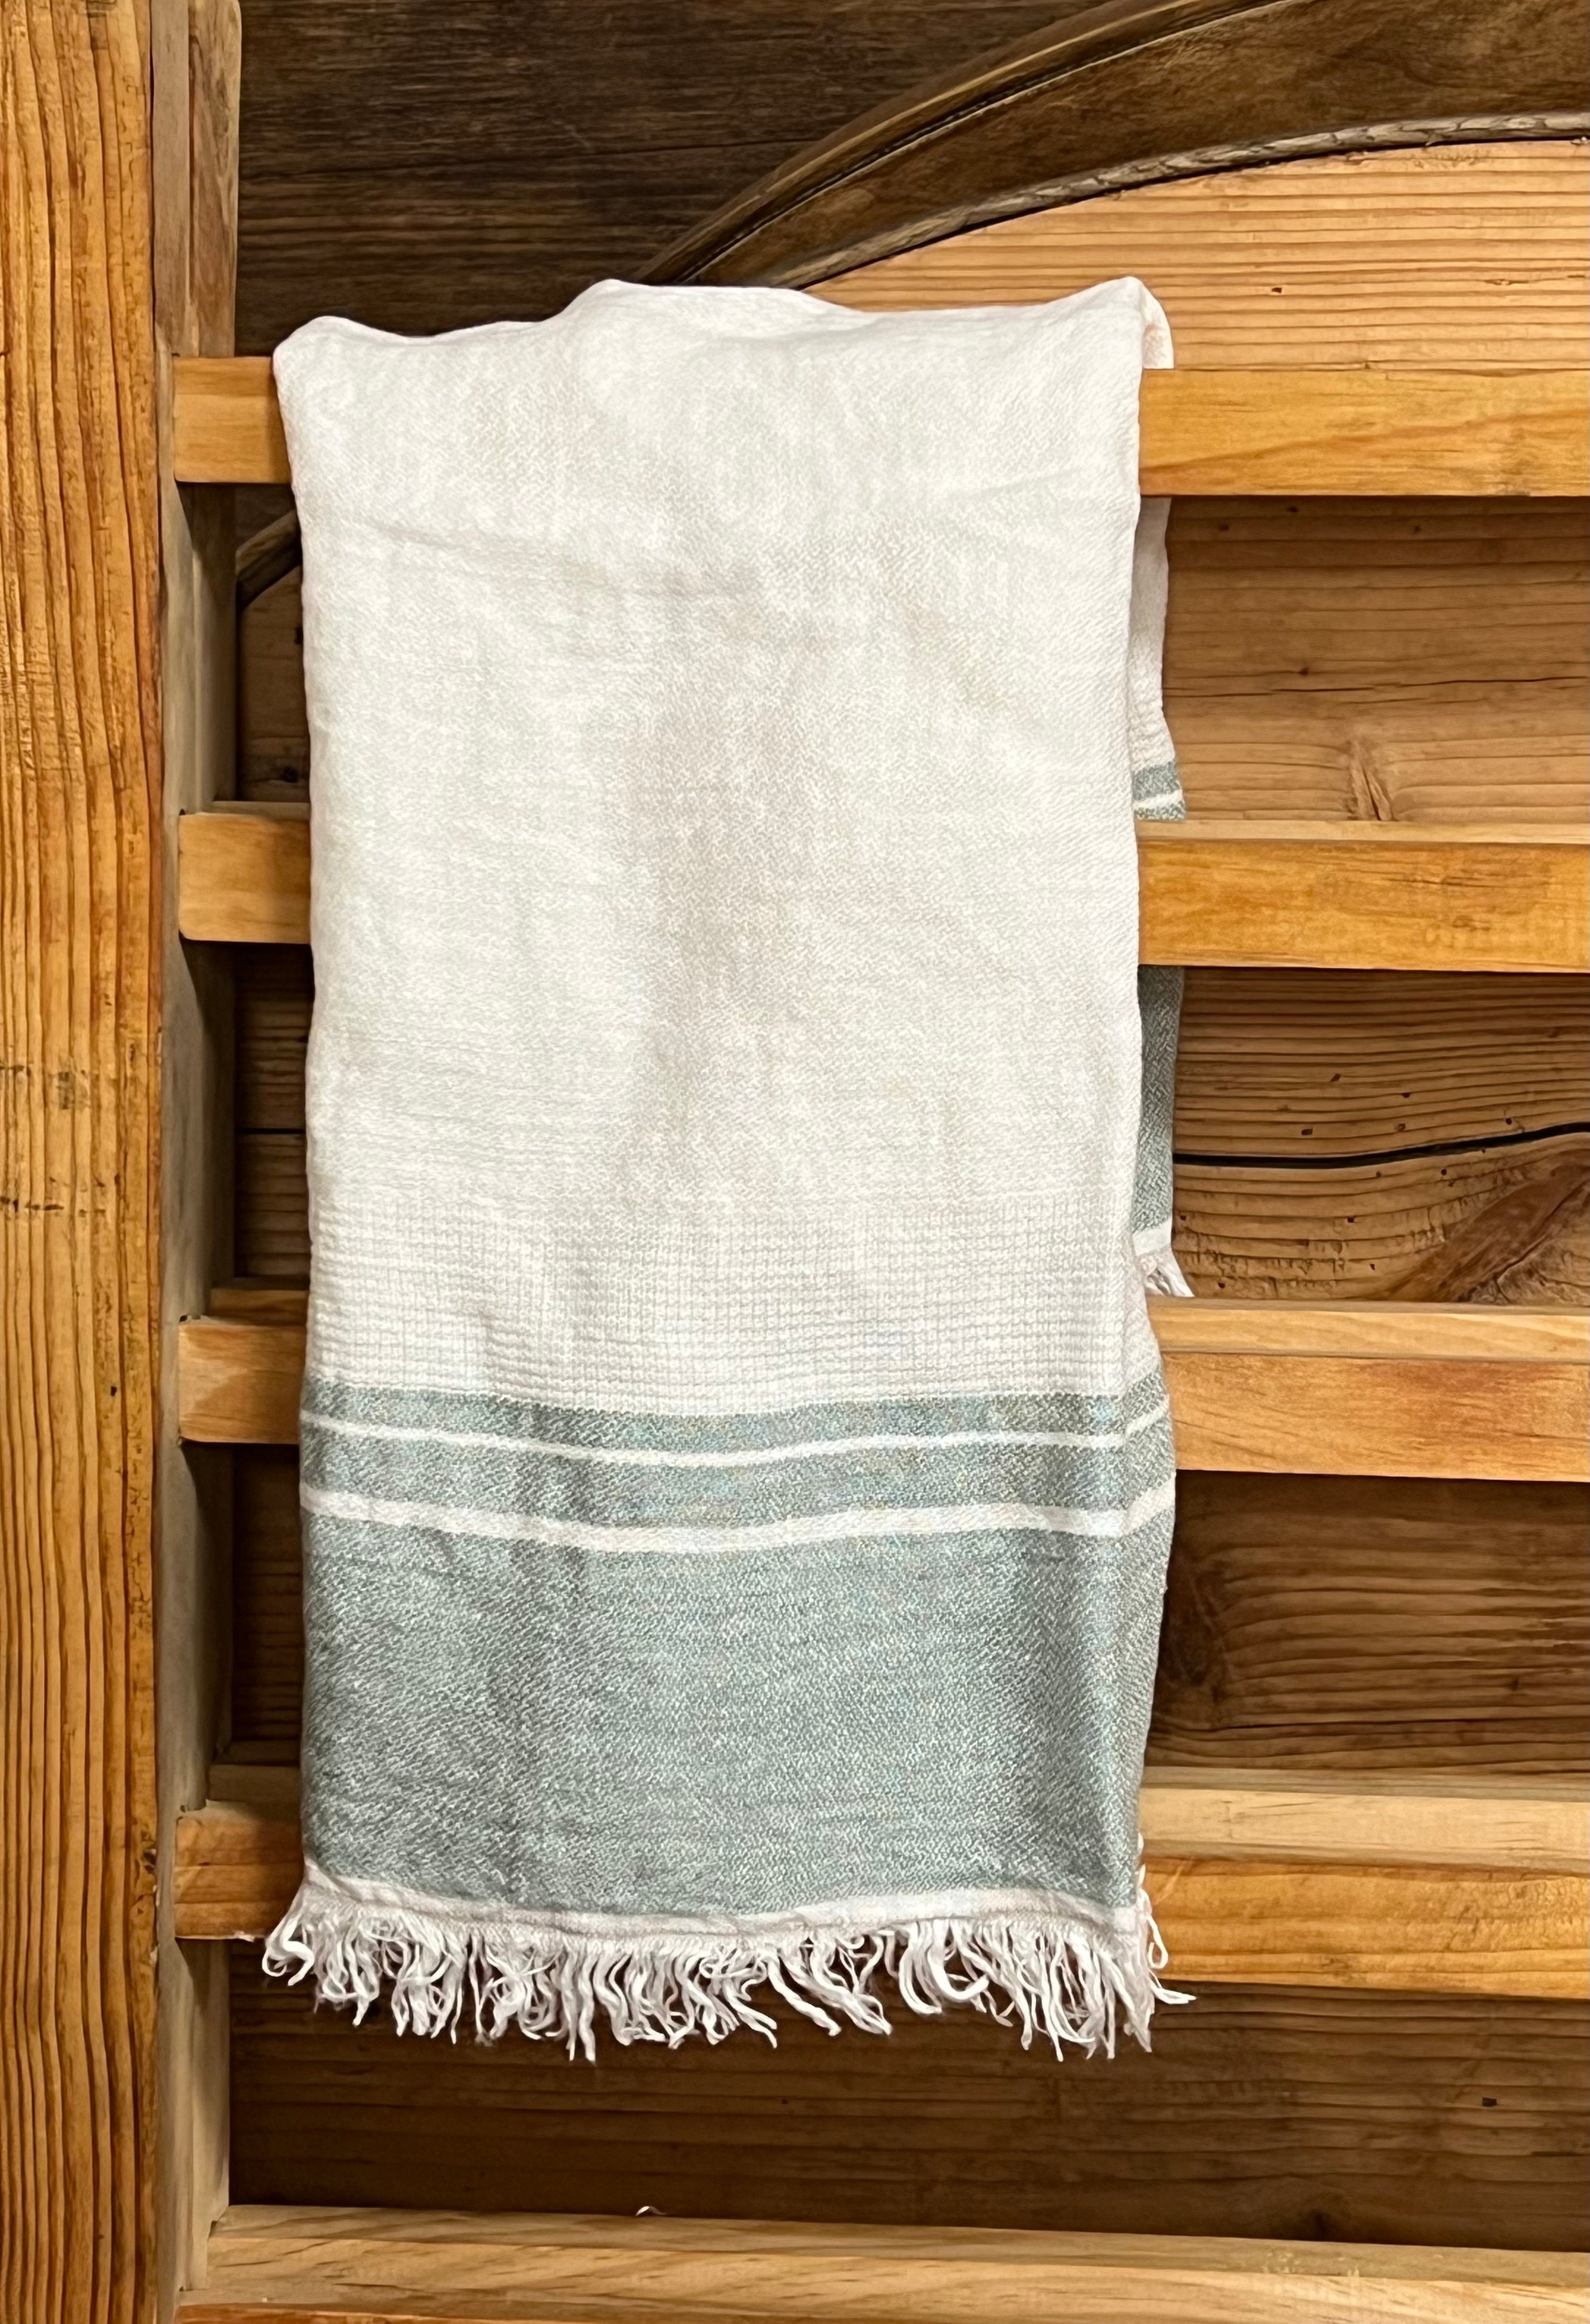 The Belgian Towel ~ available in 3 colors